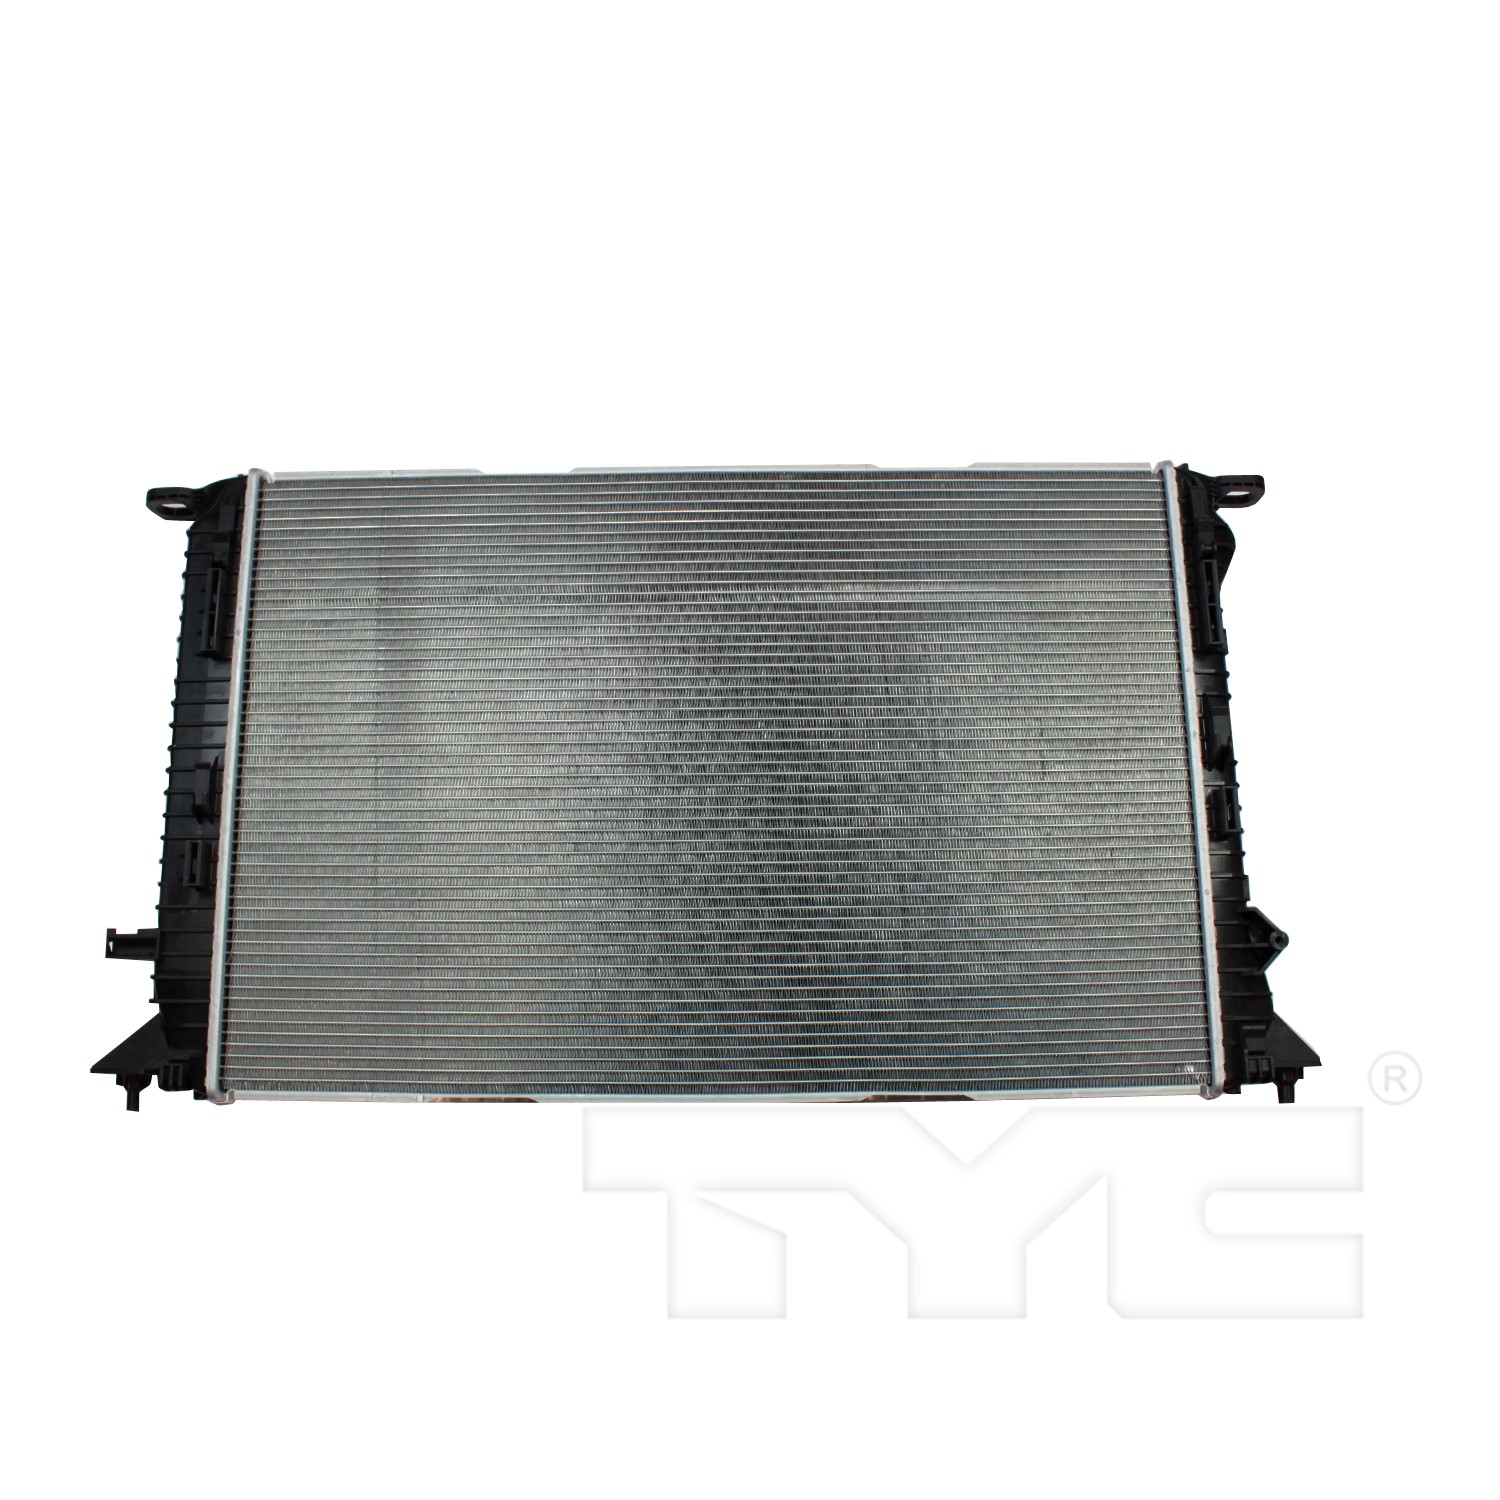 Aftermarket RADIATORS for AUDI - A5 QUATTRO, A5 QUATTRO,10-16,Radiator assembly